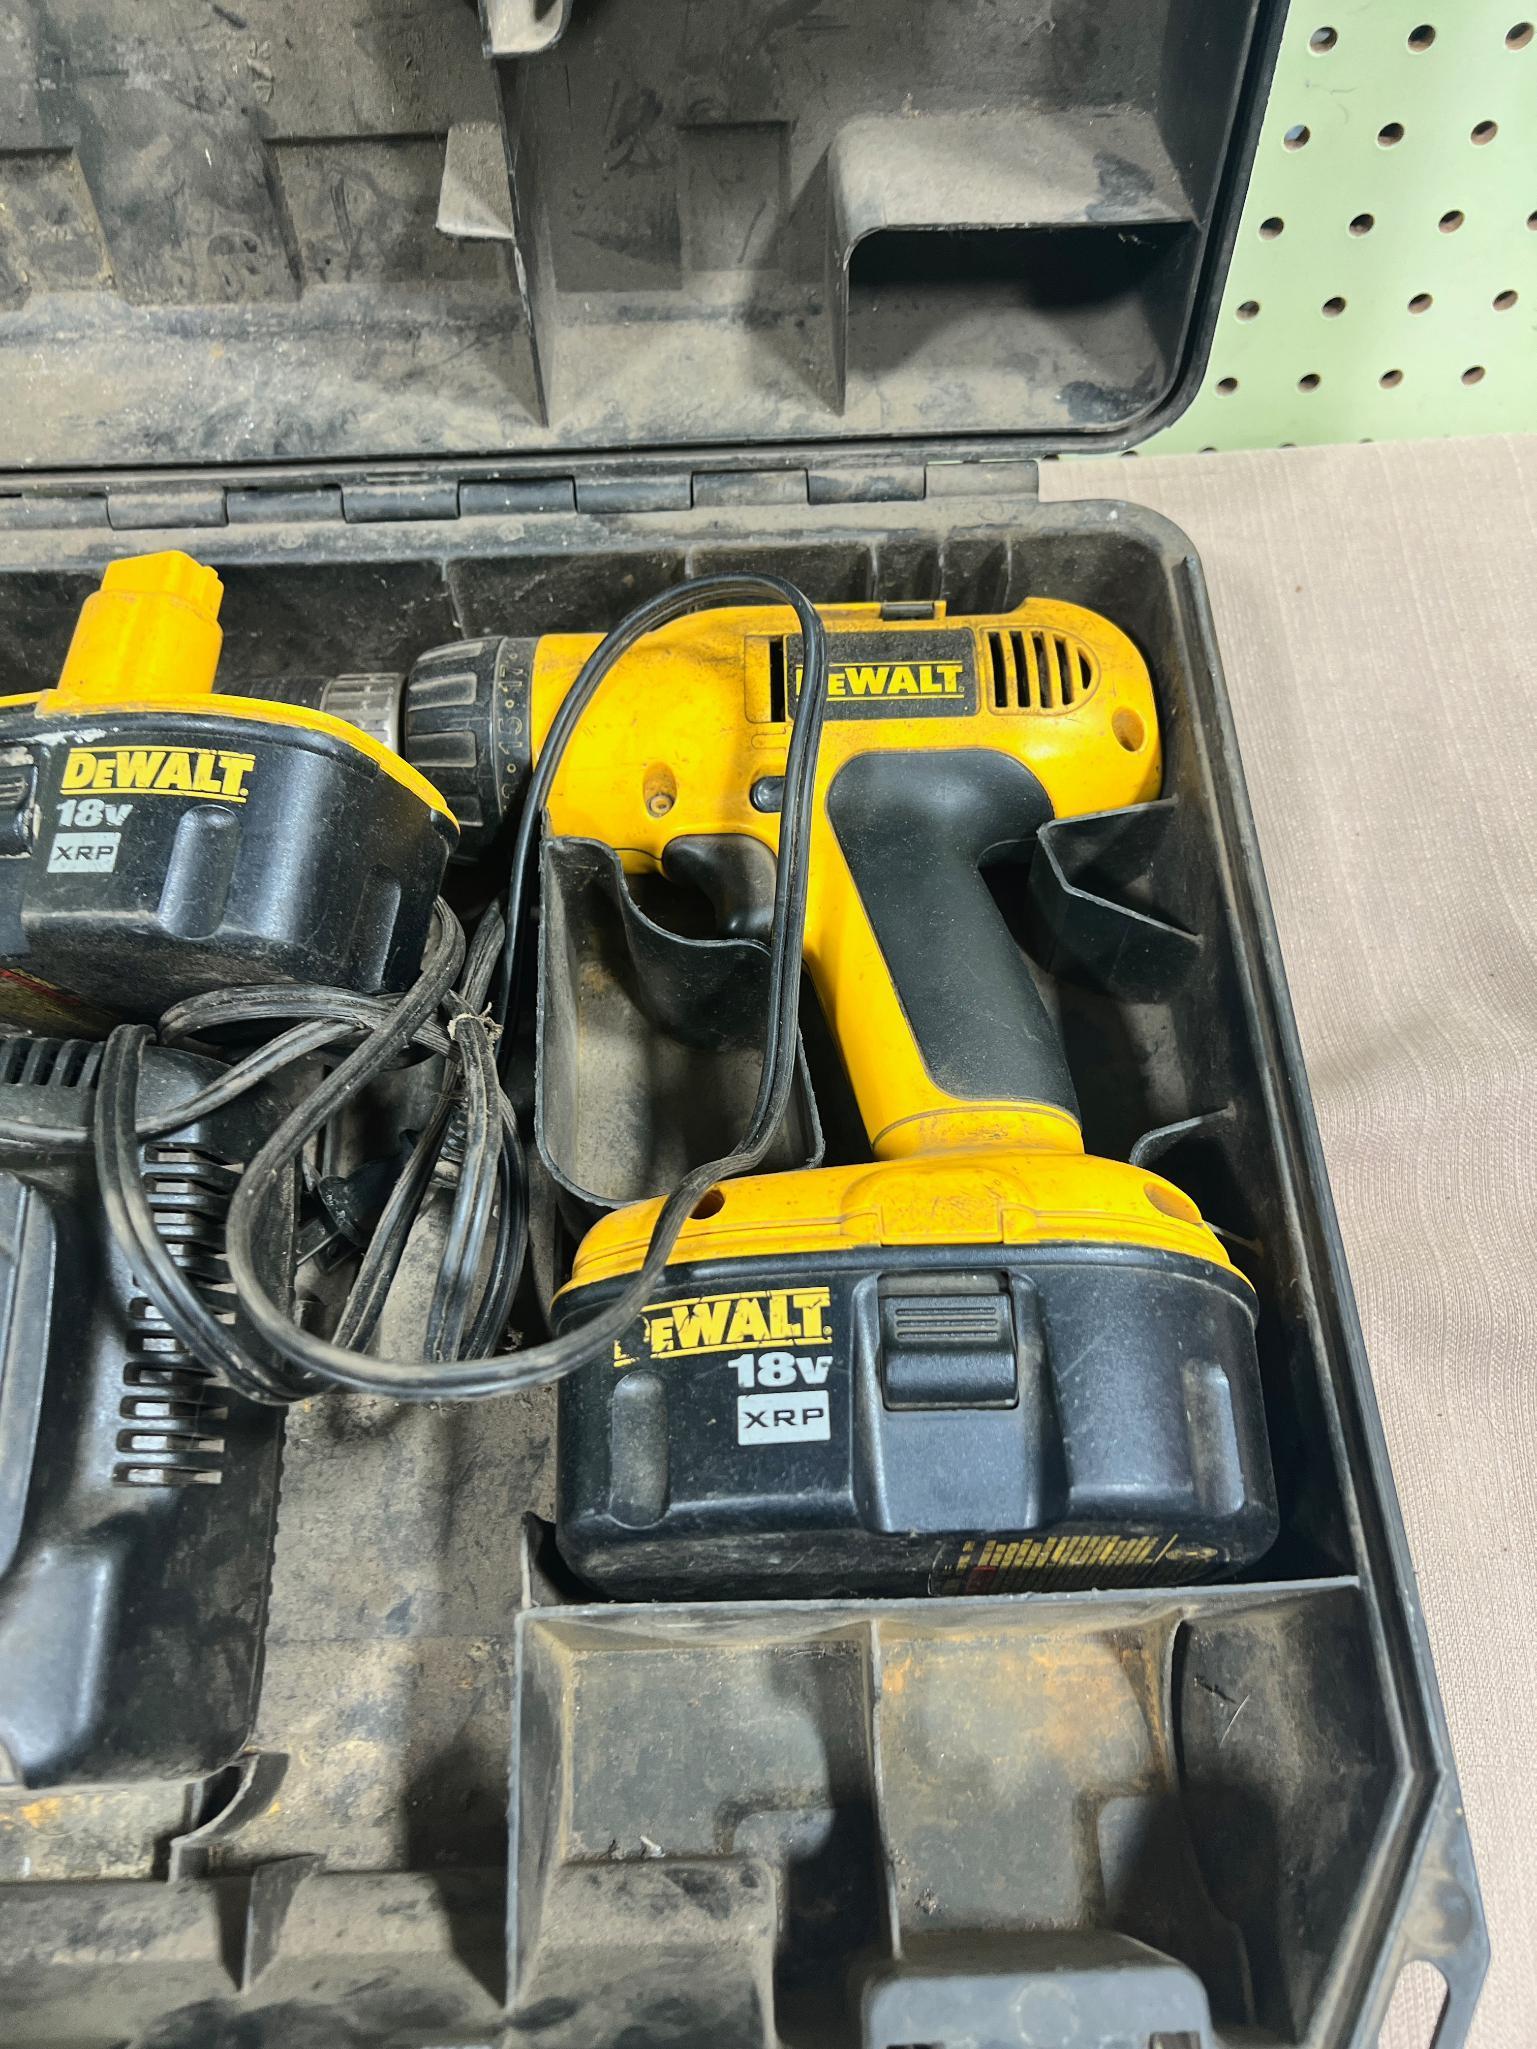 Dewalt 18 Volt Drill w/ 2 batteries, charger and drill, both batteries currently have a charge